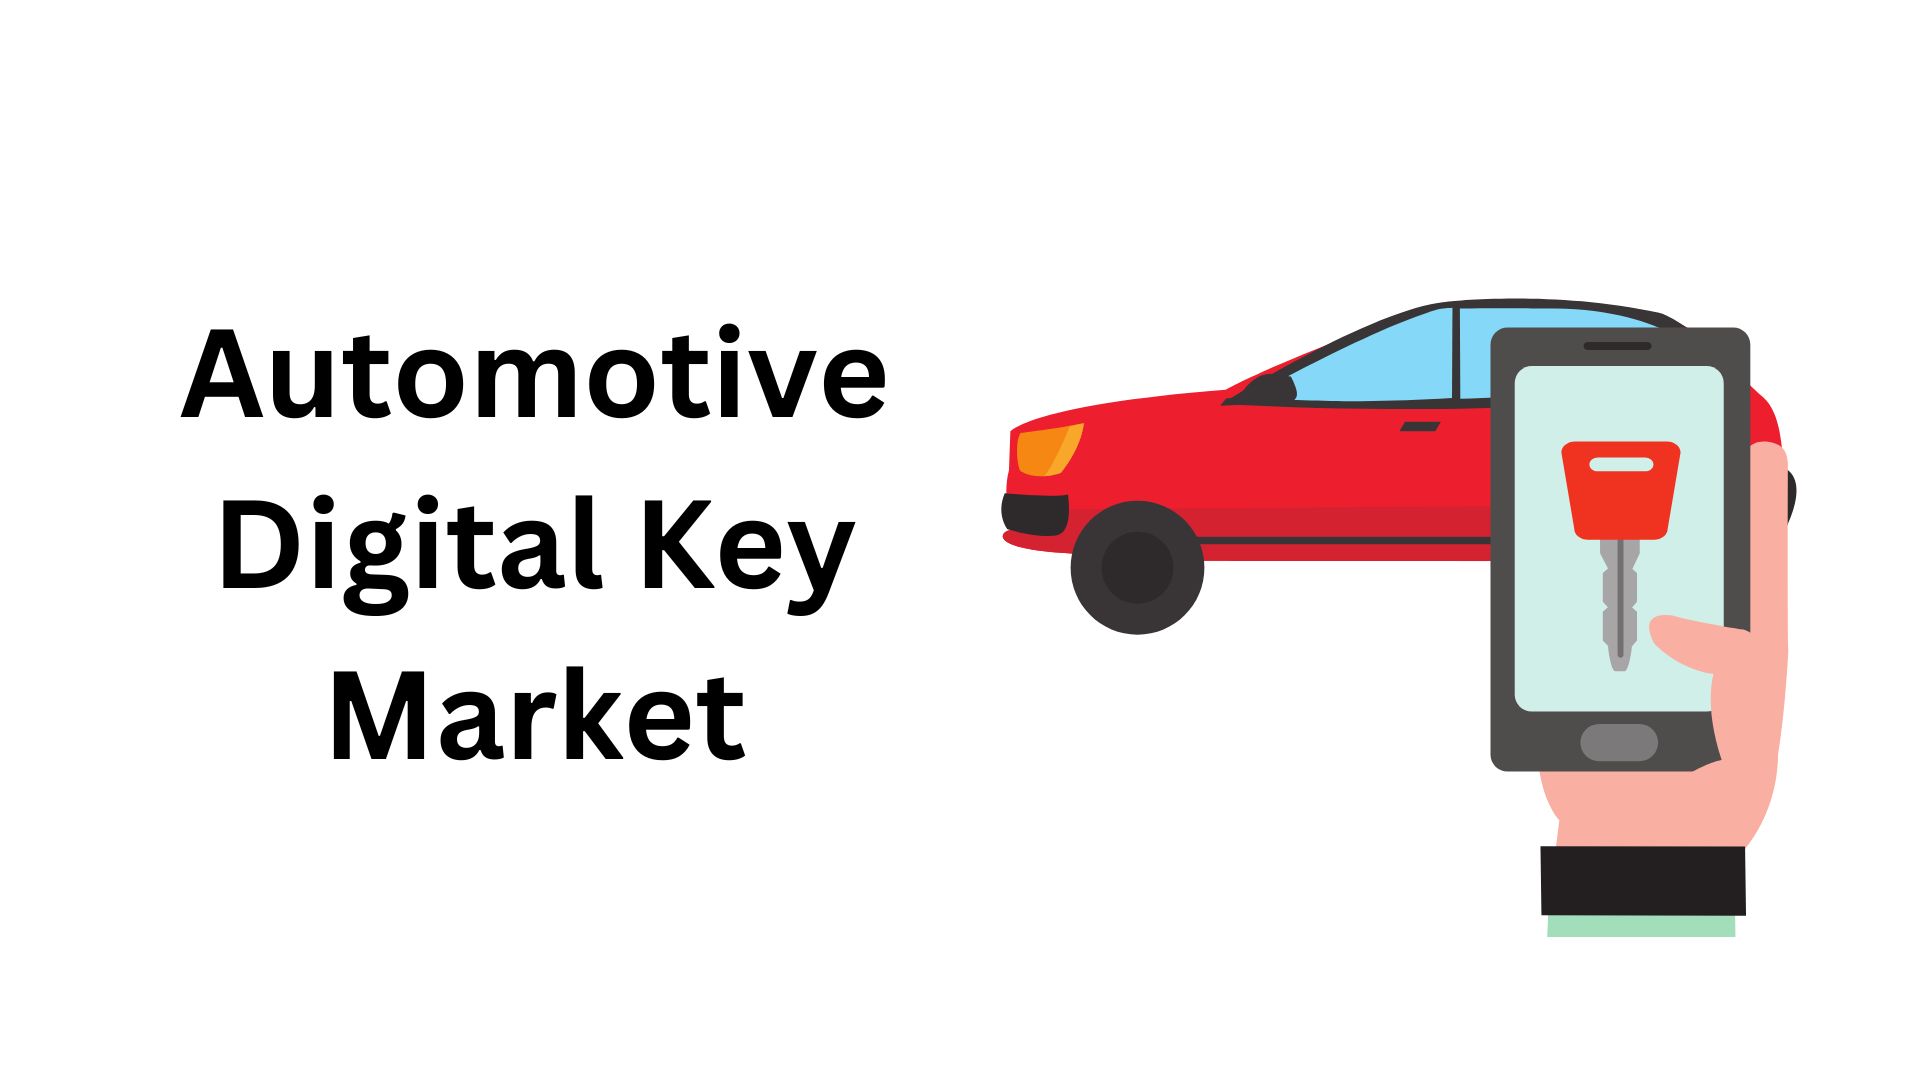 Global Automotive Digital Key Market Size Was To Reach USD 1.4 Billion In 2022 And Projected To Reach a Revised Size Of USD 7.7 Billion By 2032